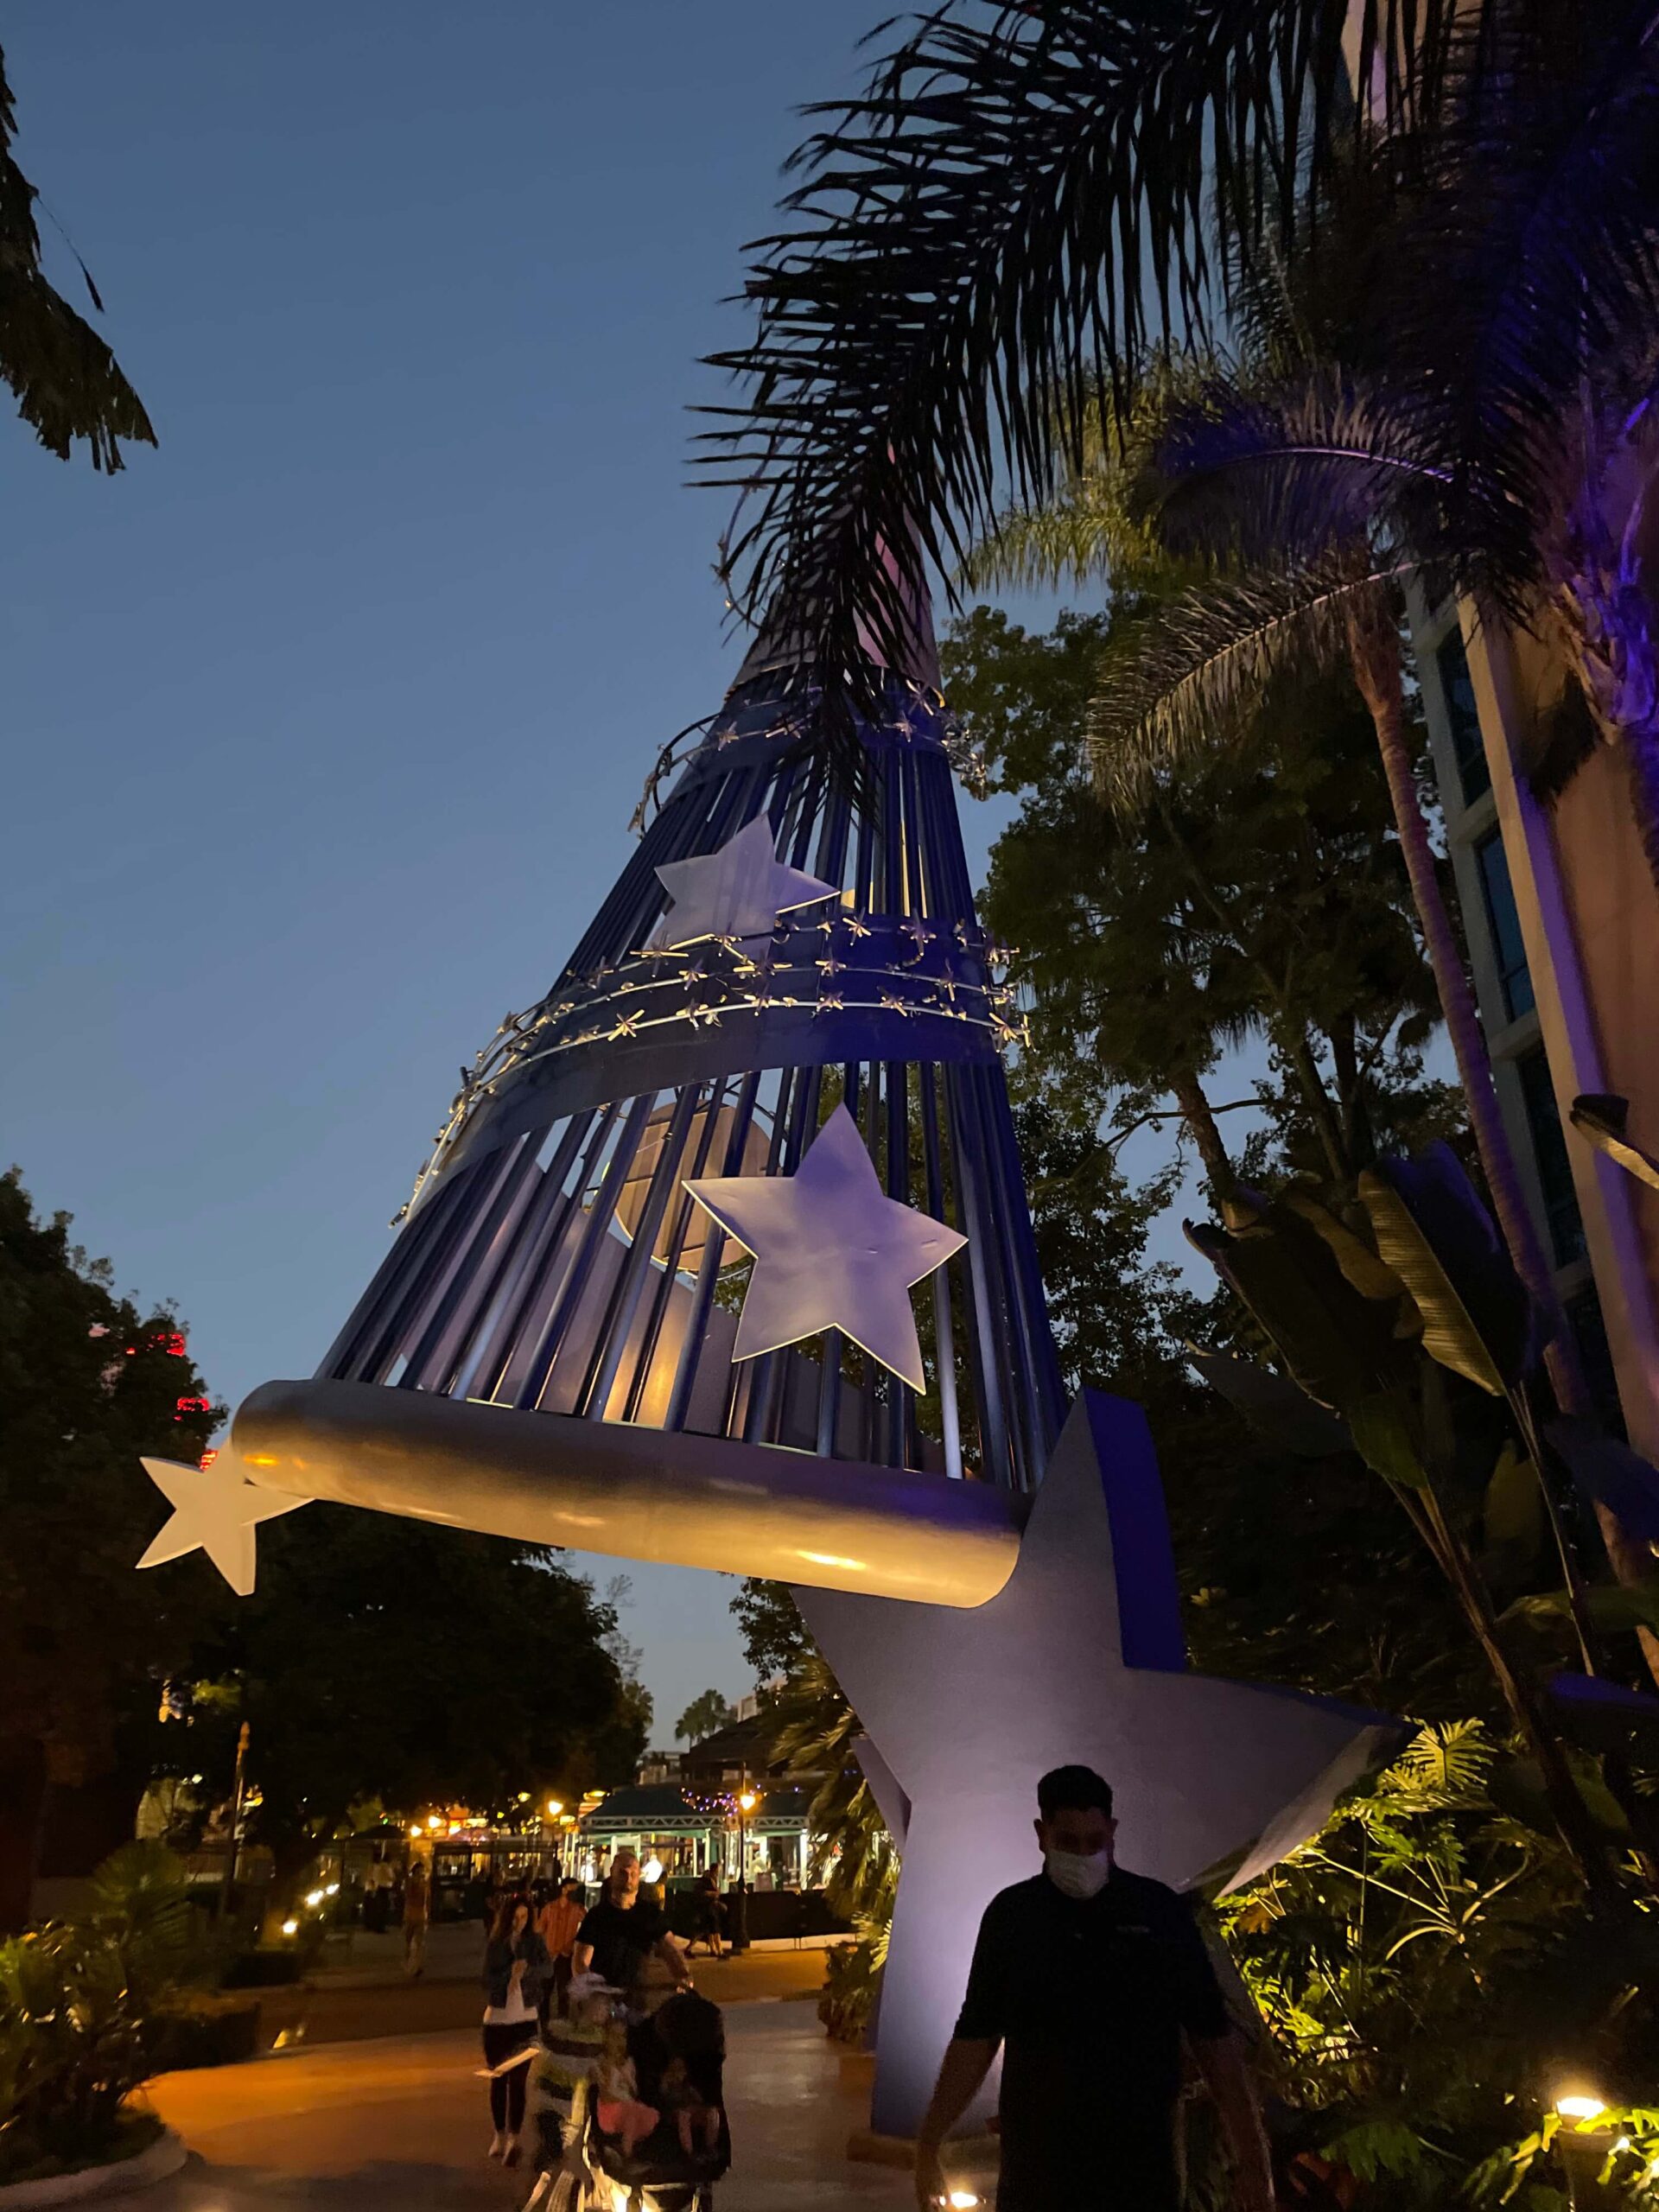 sorcerer mickey hat outside of the disneyland hotel at night